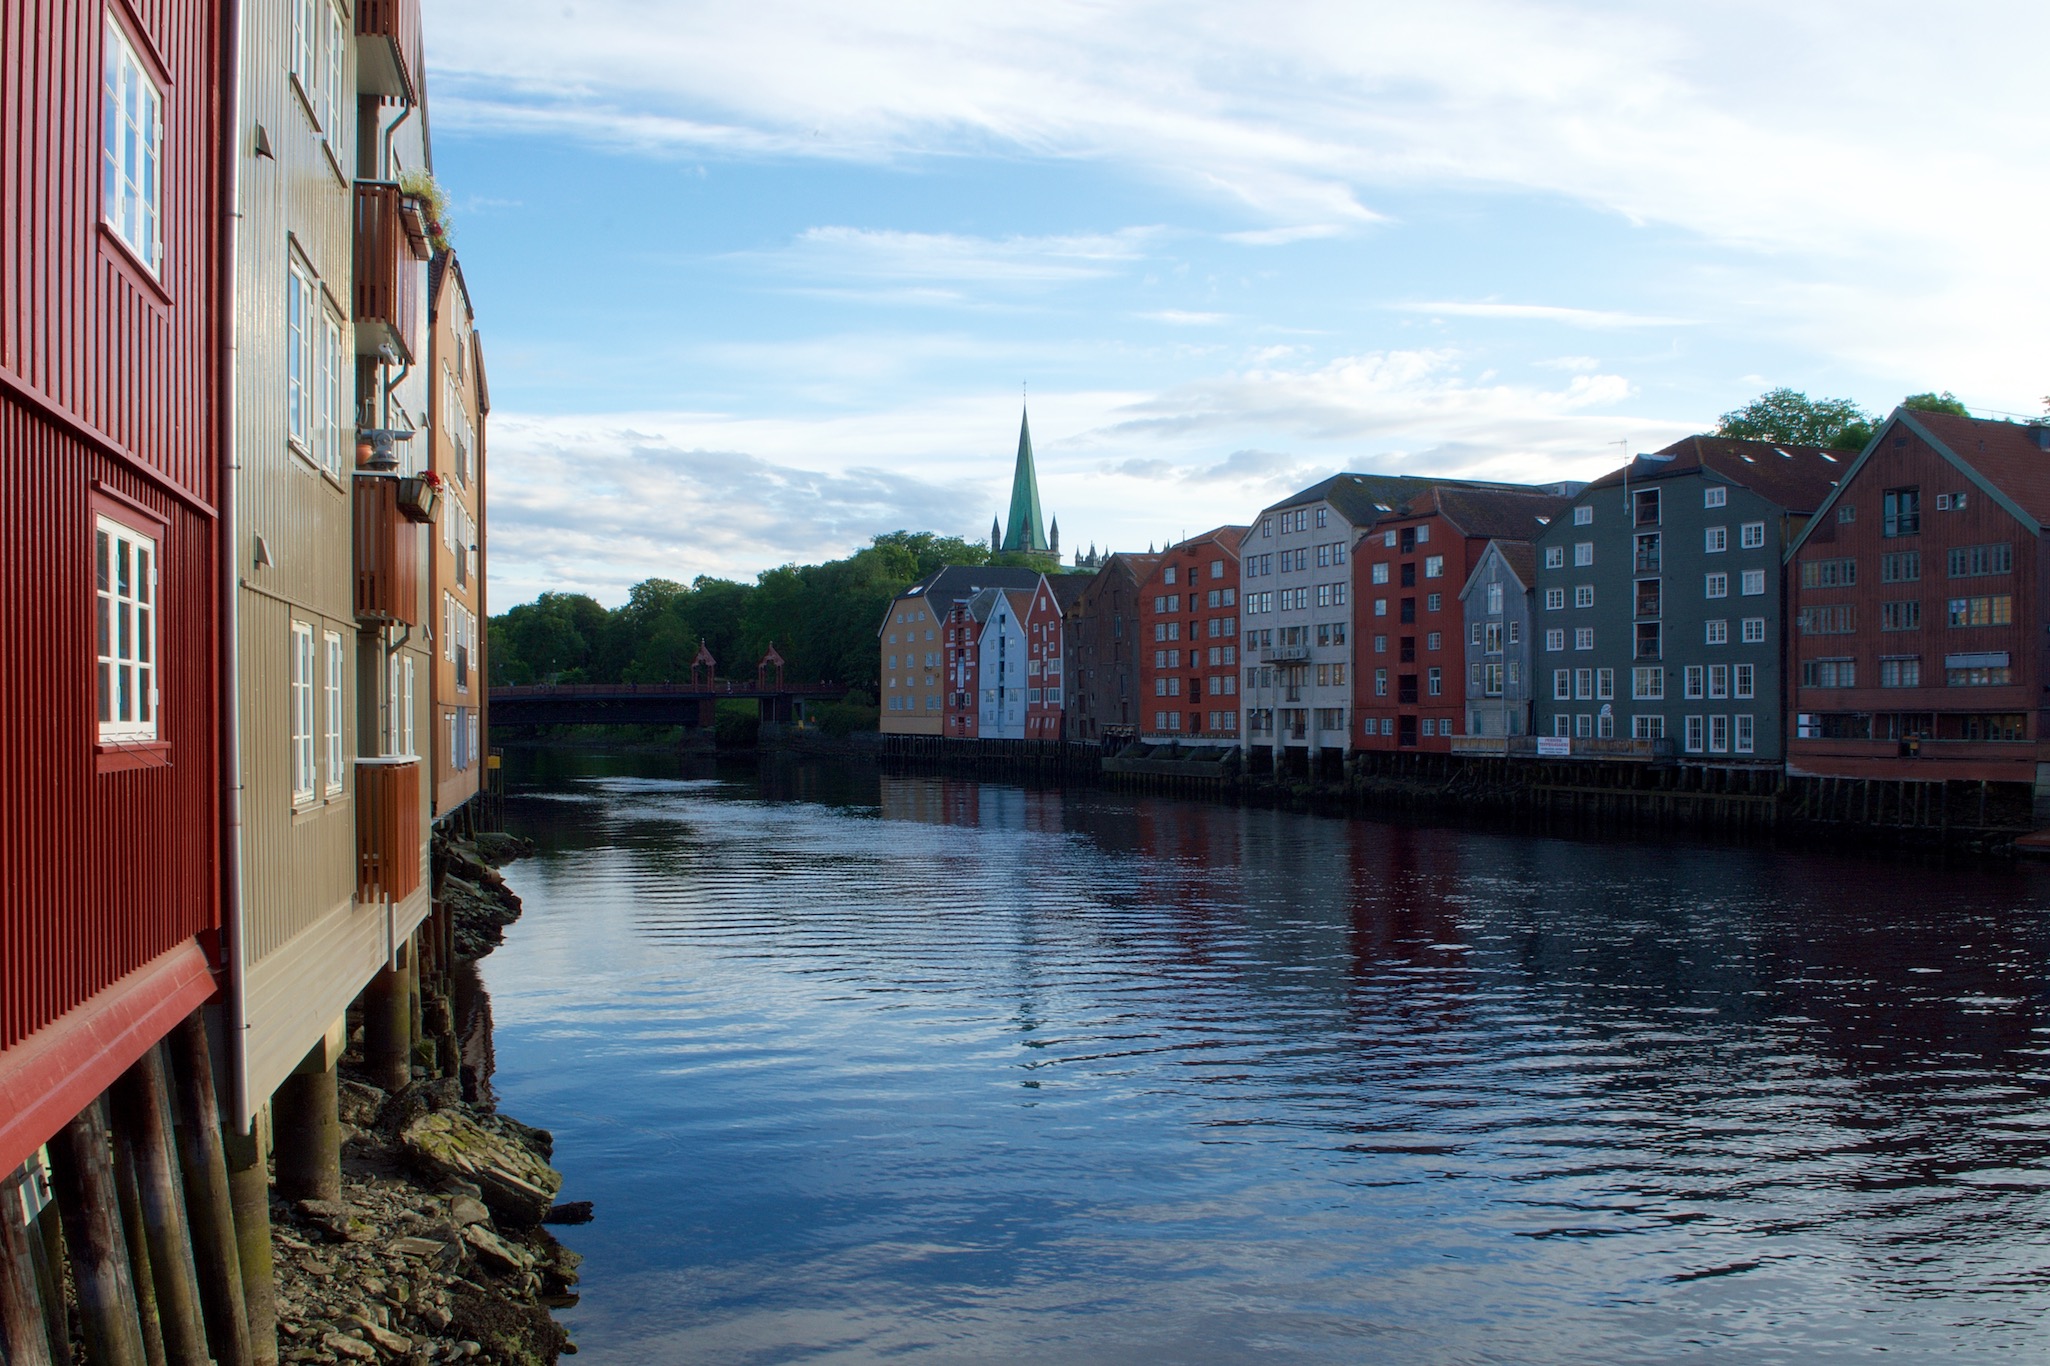 Colored wooden houses along the River Nidelven in Trondheim, Norway